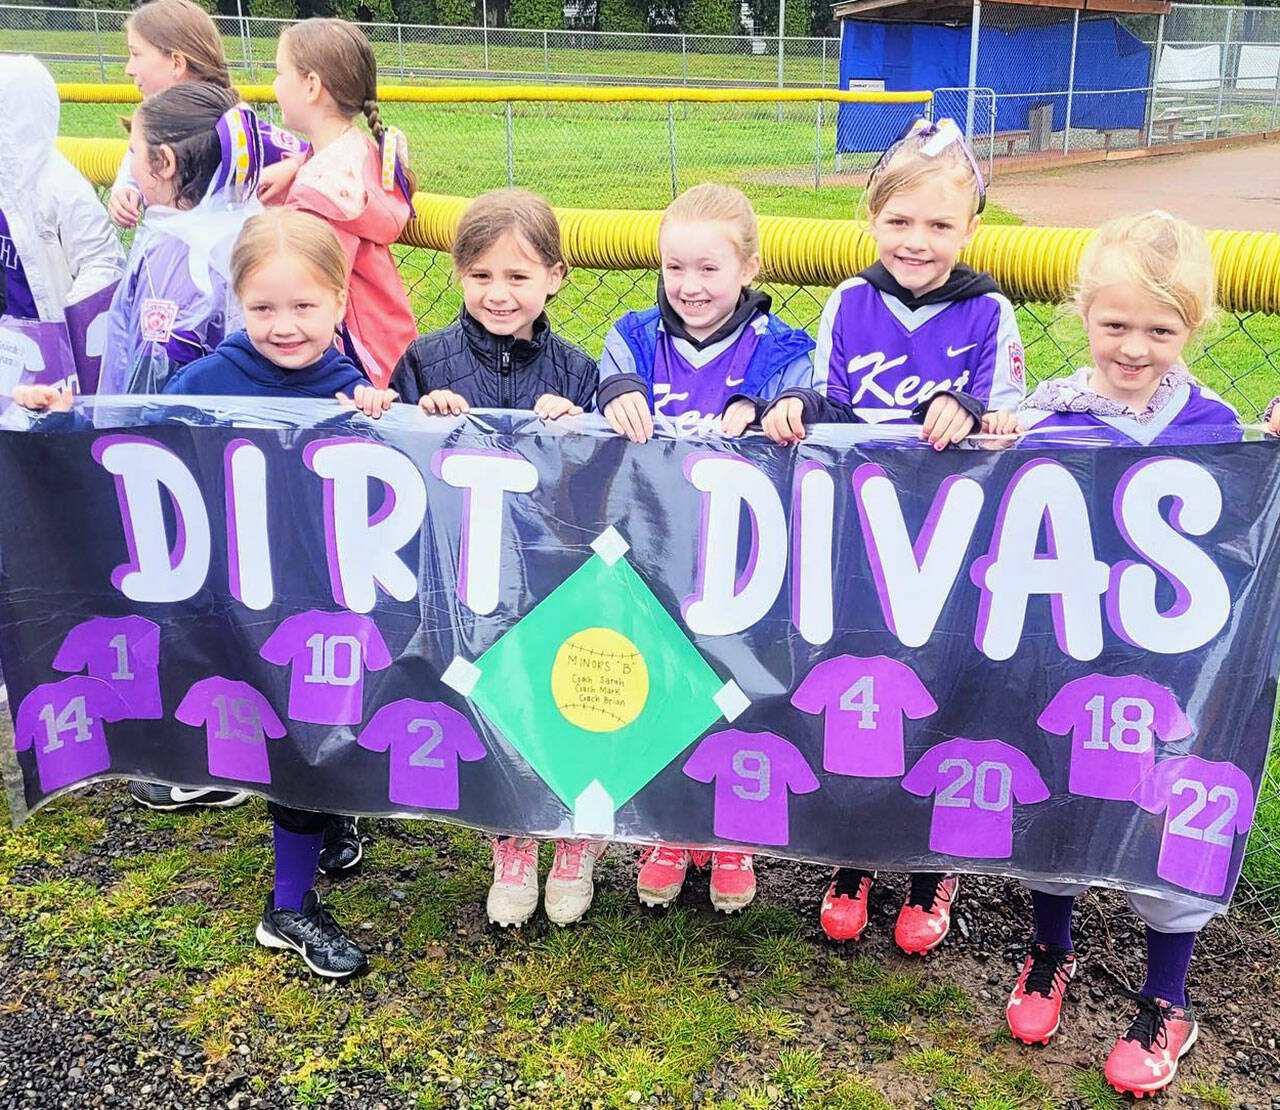 The Dirt Divas pose for a photo during Kent Little League Opening Day April 30. The league offers baseball and softball divisions. COURTESY PHOTO, Kent Little League